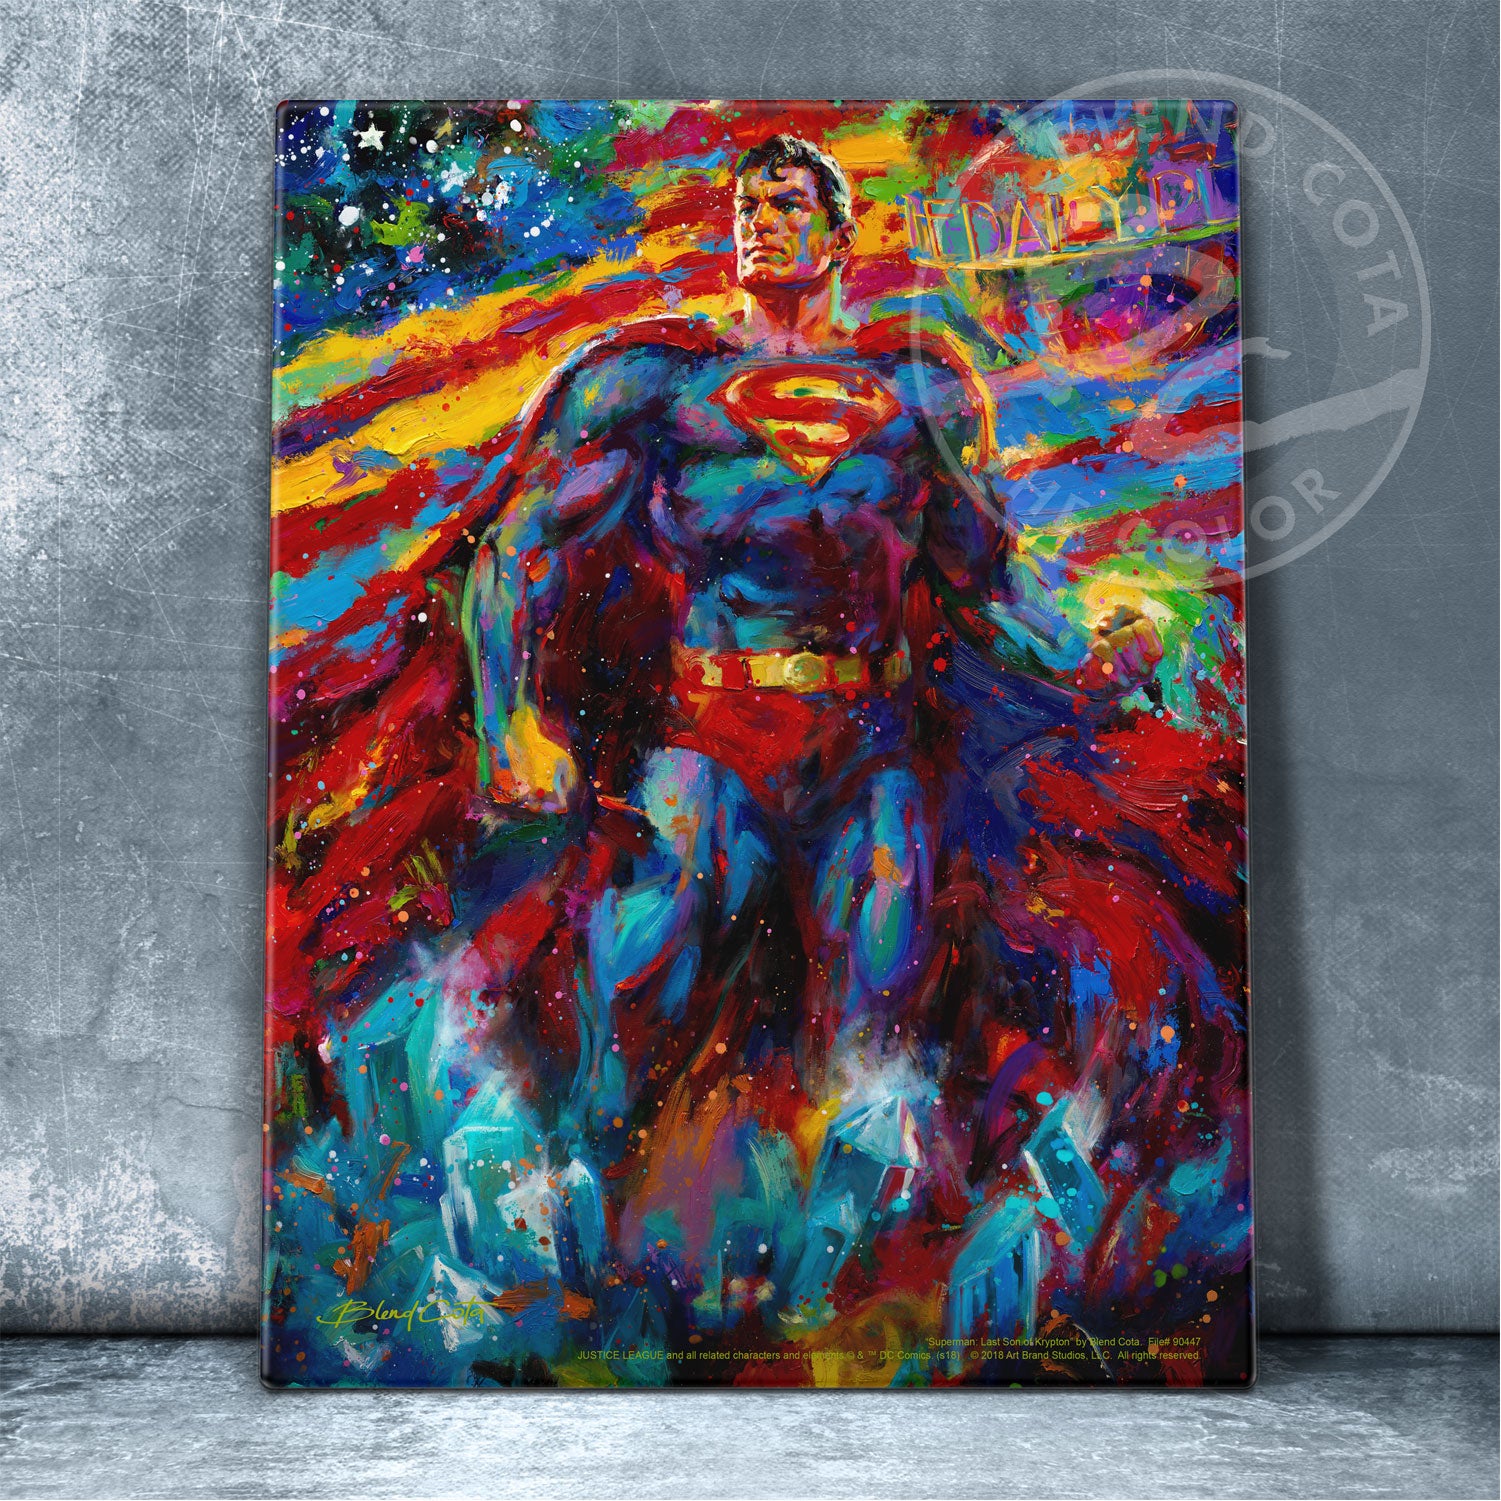 Red and blue tones are proudly used throughout this patriotic piece as Superman’s cape blends into the American Flag.